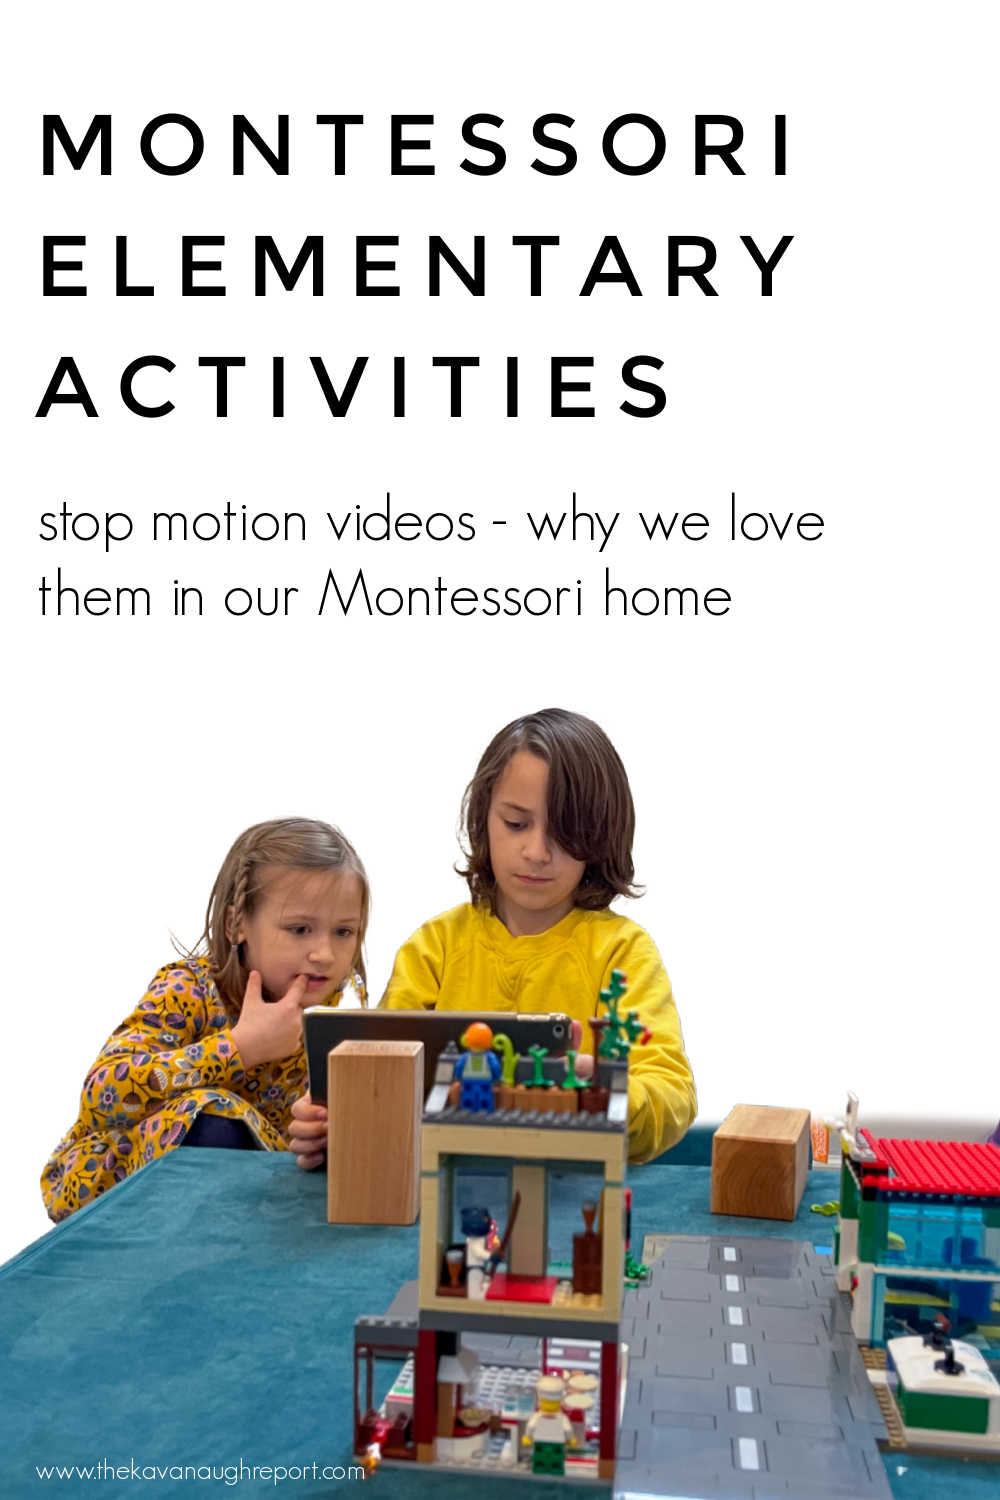 A look at how we use stop motion videos in our Montessori home with our elementary aged children and why we love it as an engaging activity